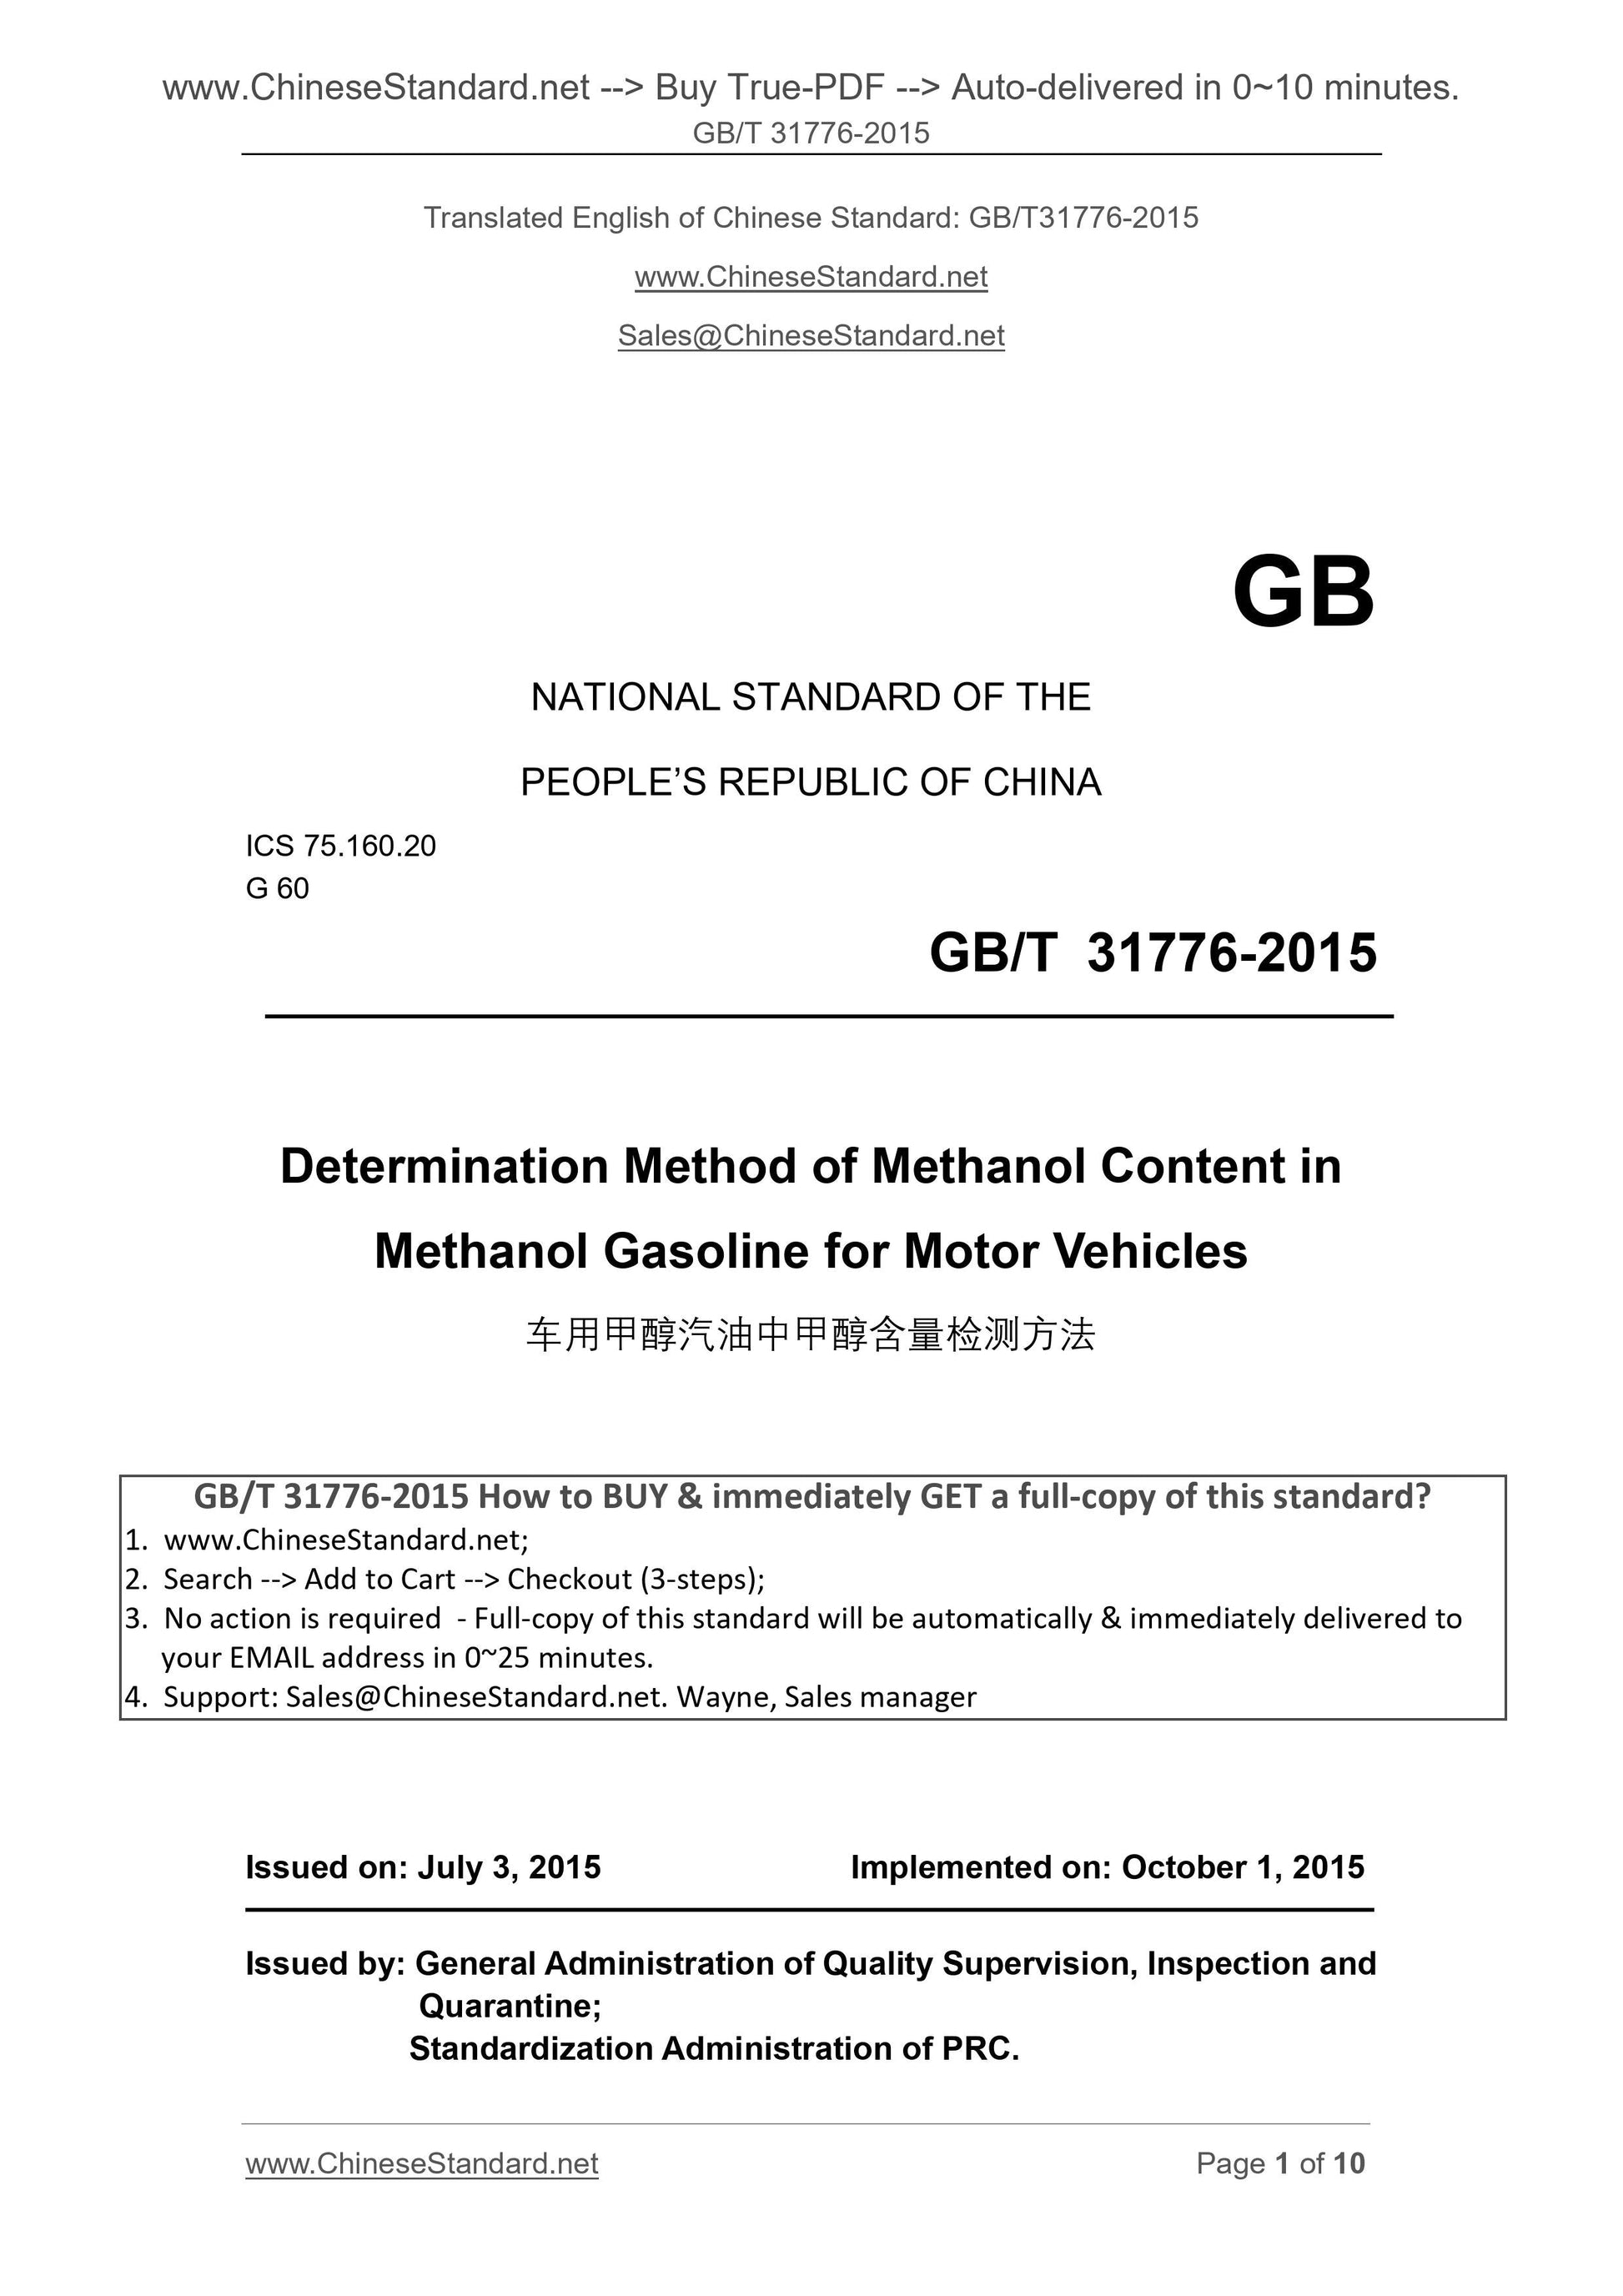 GB/T 31776-2015 Page 1